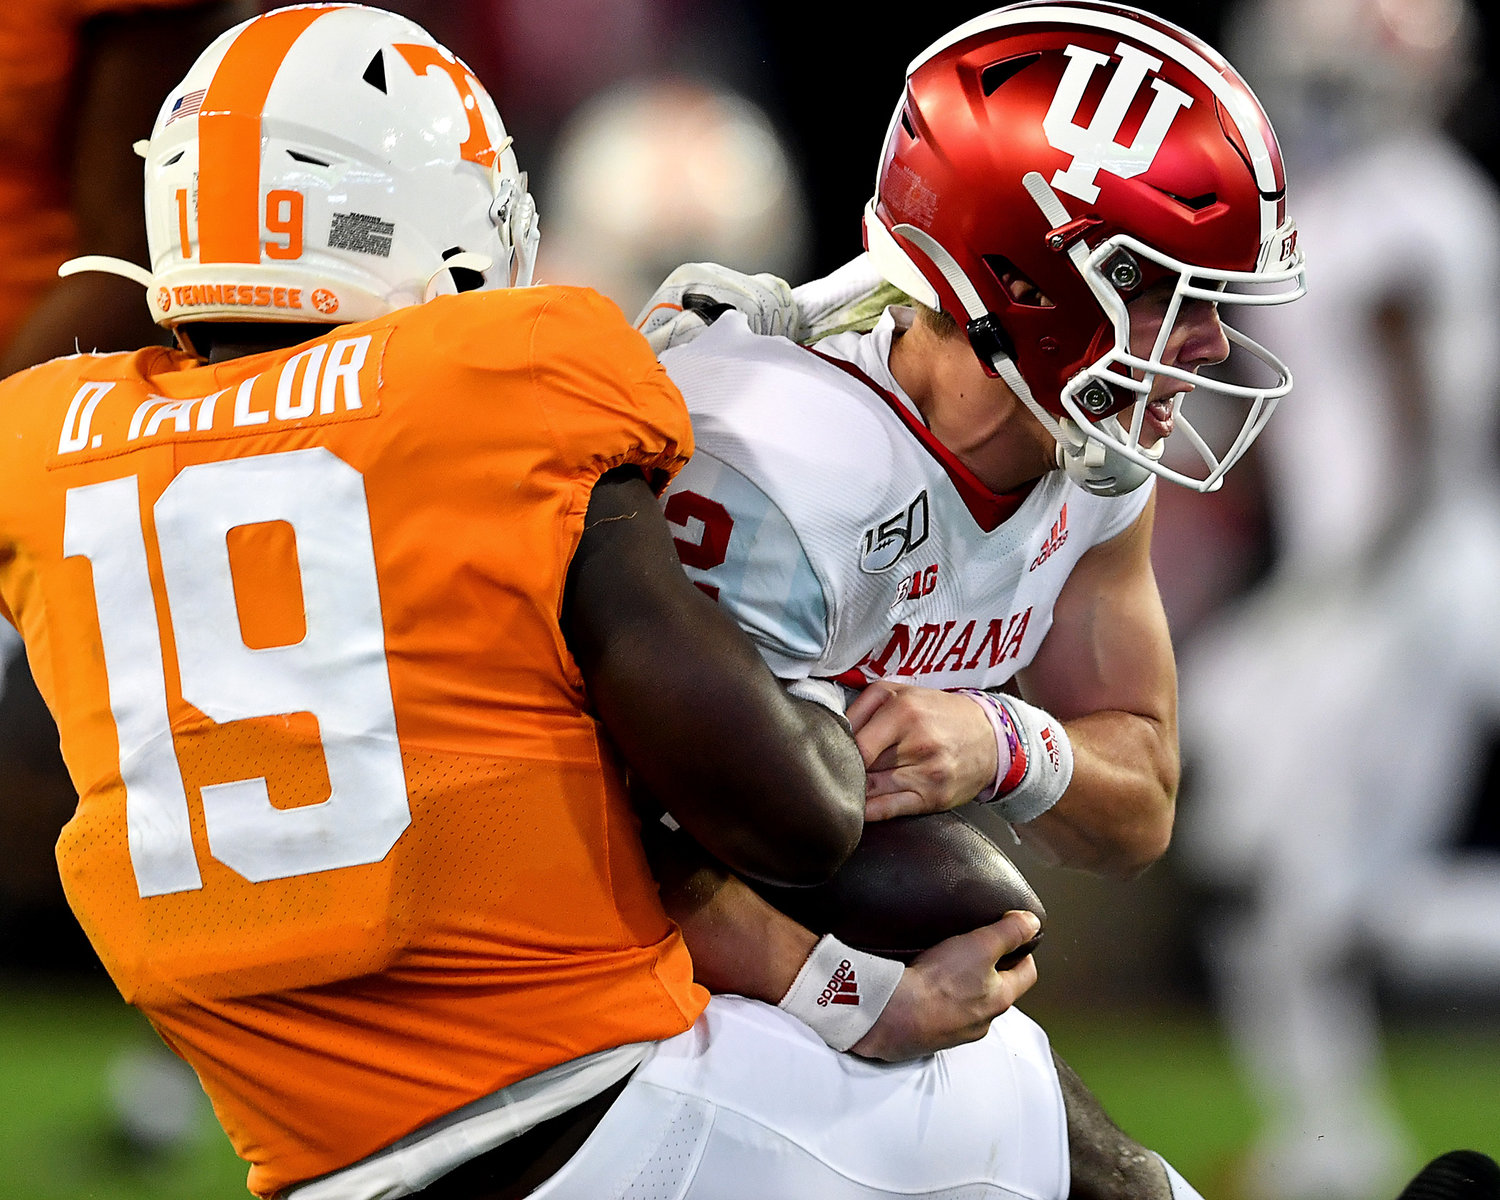 Tennessee Volunteers linebacker Darrell Taylor (19) sacks Indiana Hoosiers quarterback Peyton Ramsey (12) in the first half of the Gator Bowl NCAA football game Thursday, January 2, 2020, at TIAA Bank Field in Jacksonville, Fla.